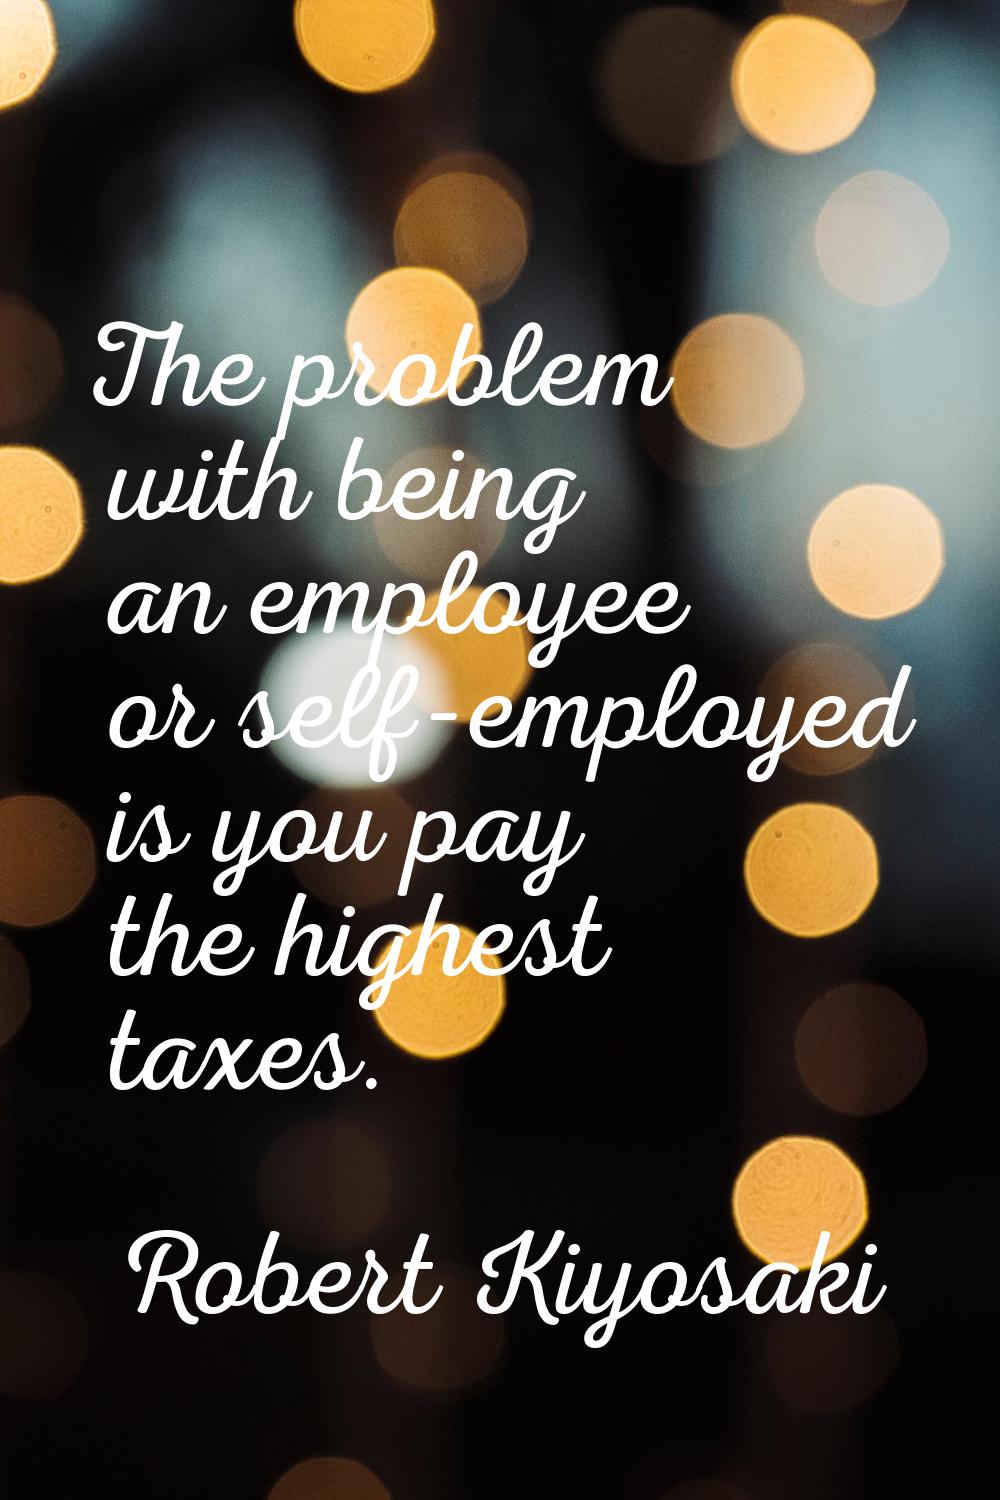 The problem with being an employee or self-employed is you pay the highest taxes.